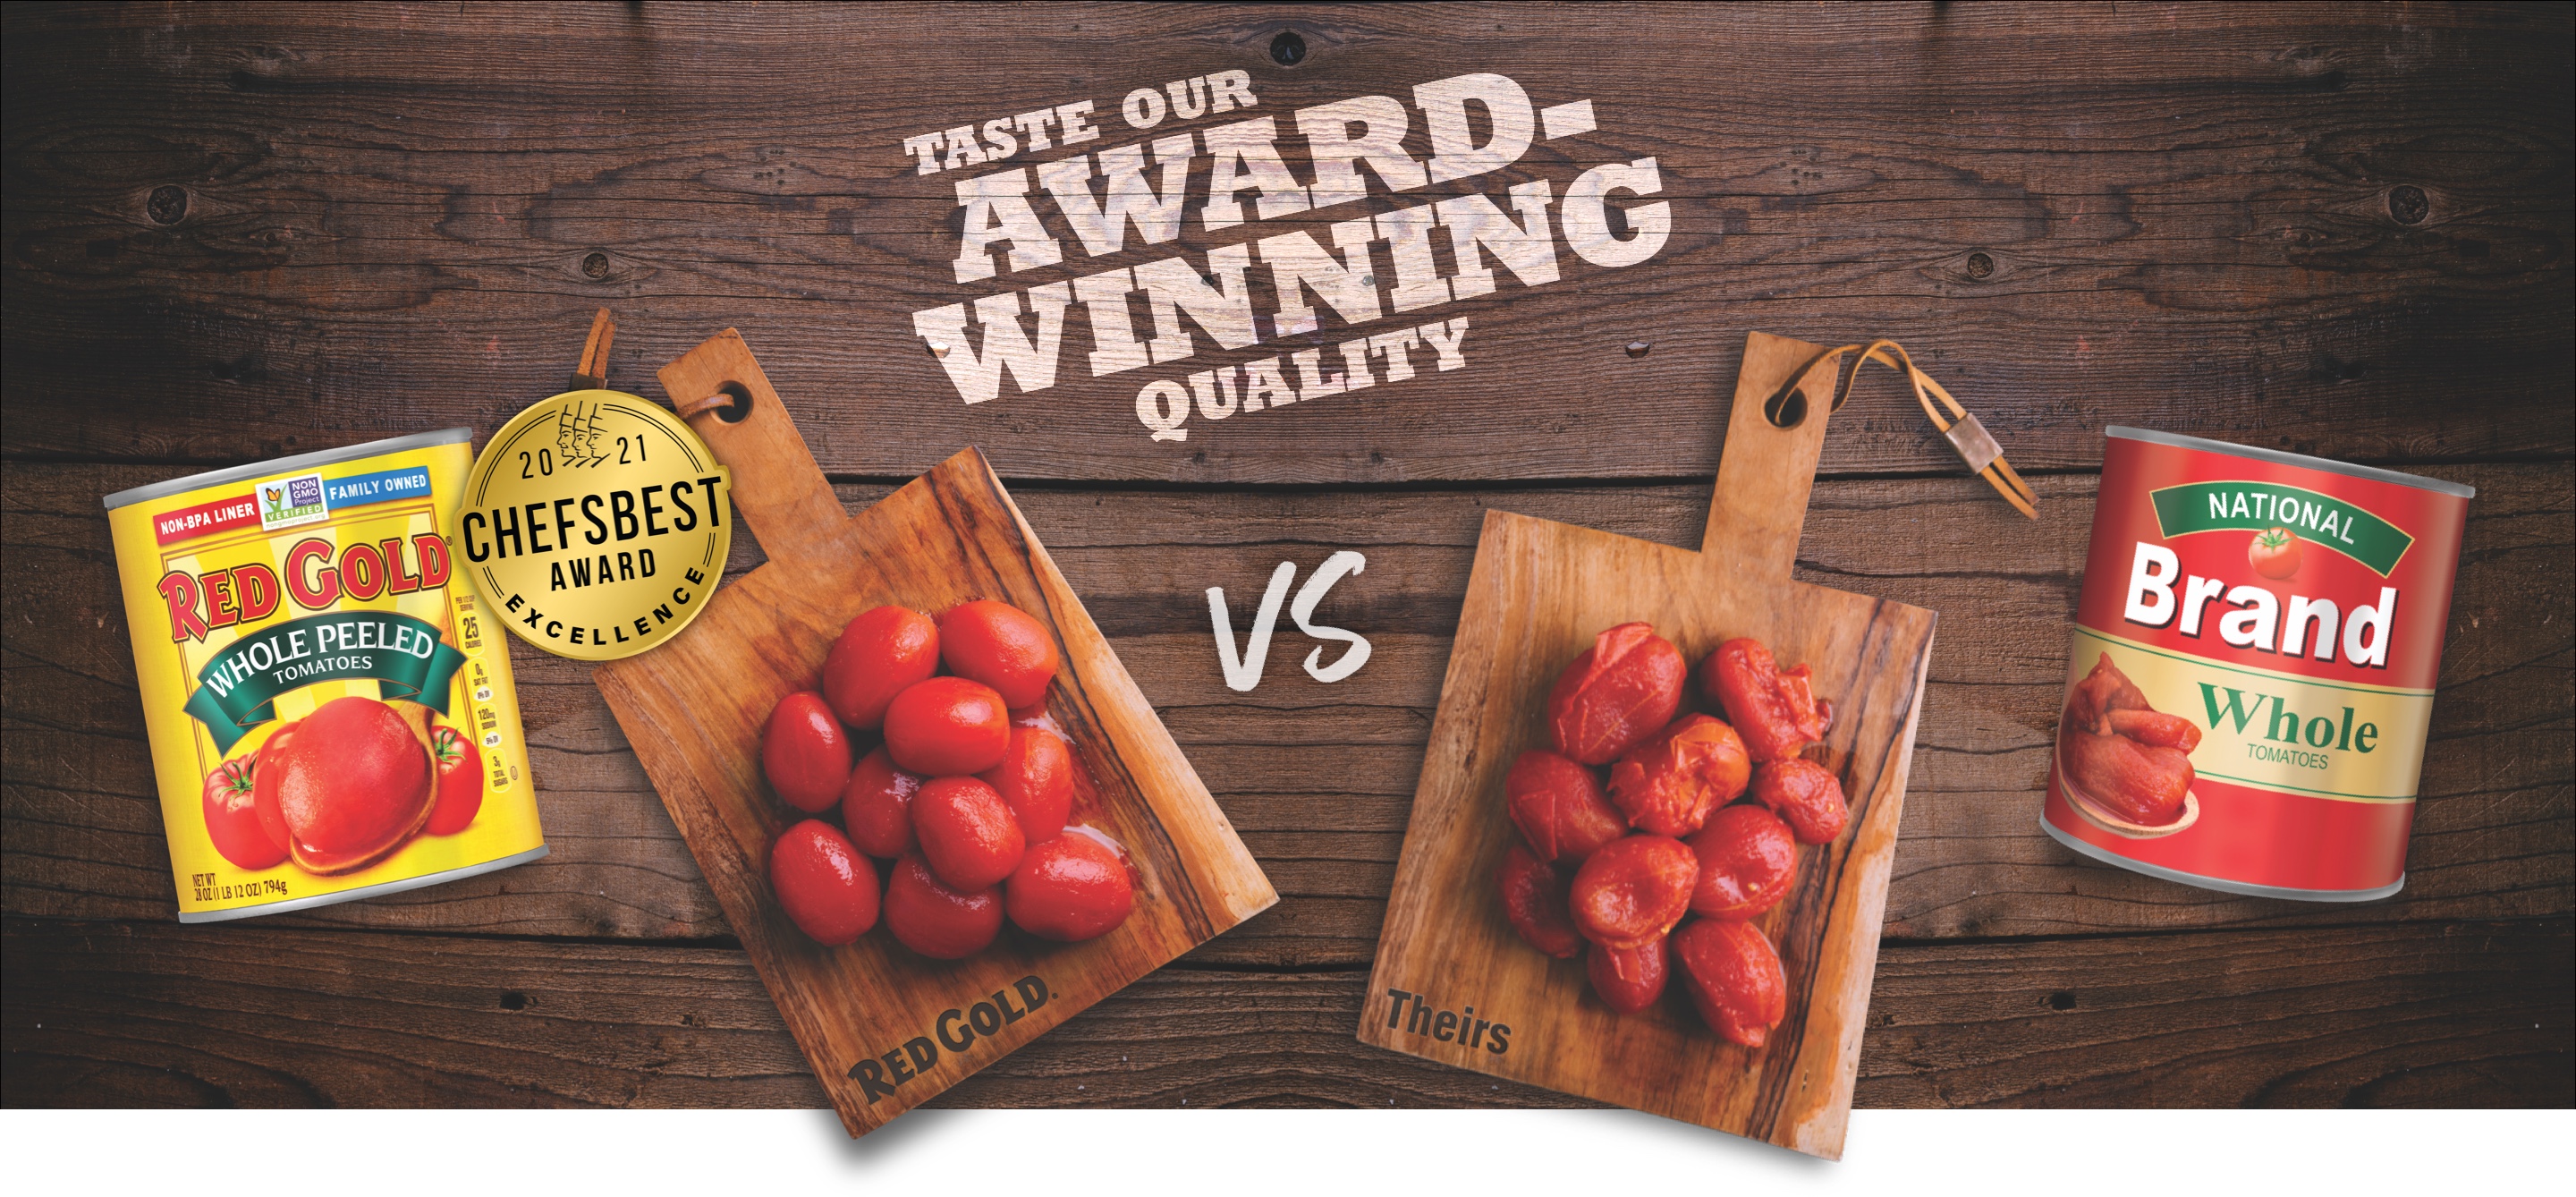 Image of Red Gold Tomatoes whole peeled comparison with Chef's Best Award Taste Our Award Winning Tomatoes